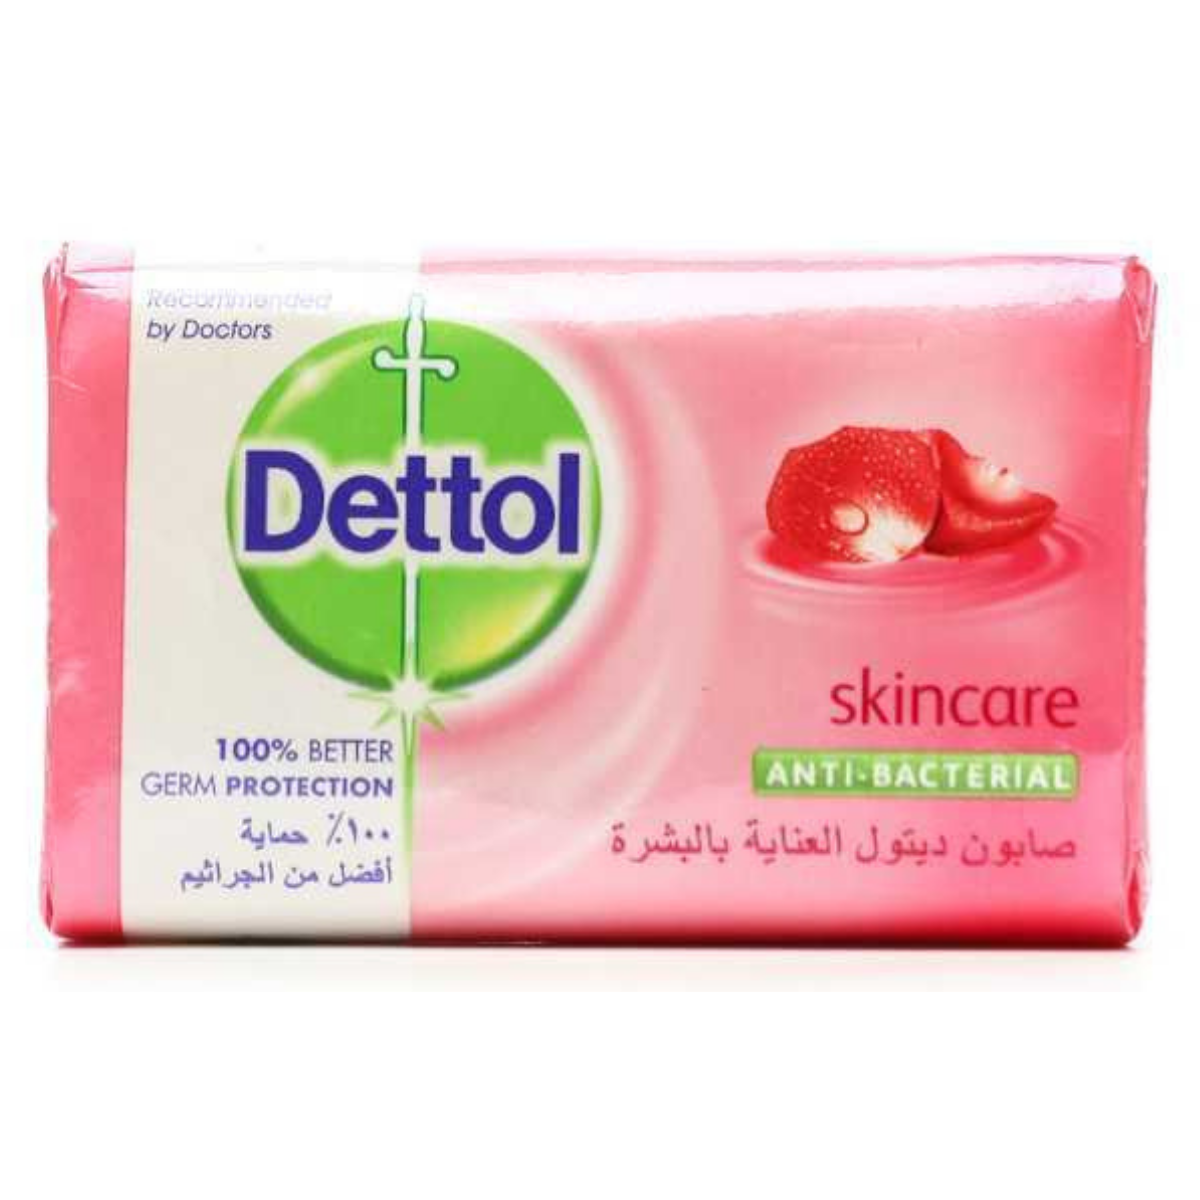 Primary image of Dettol Skincare Soap